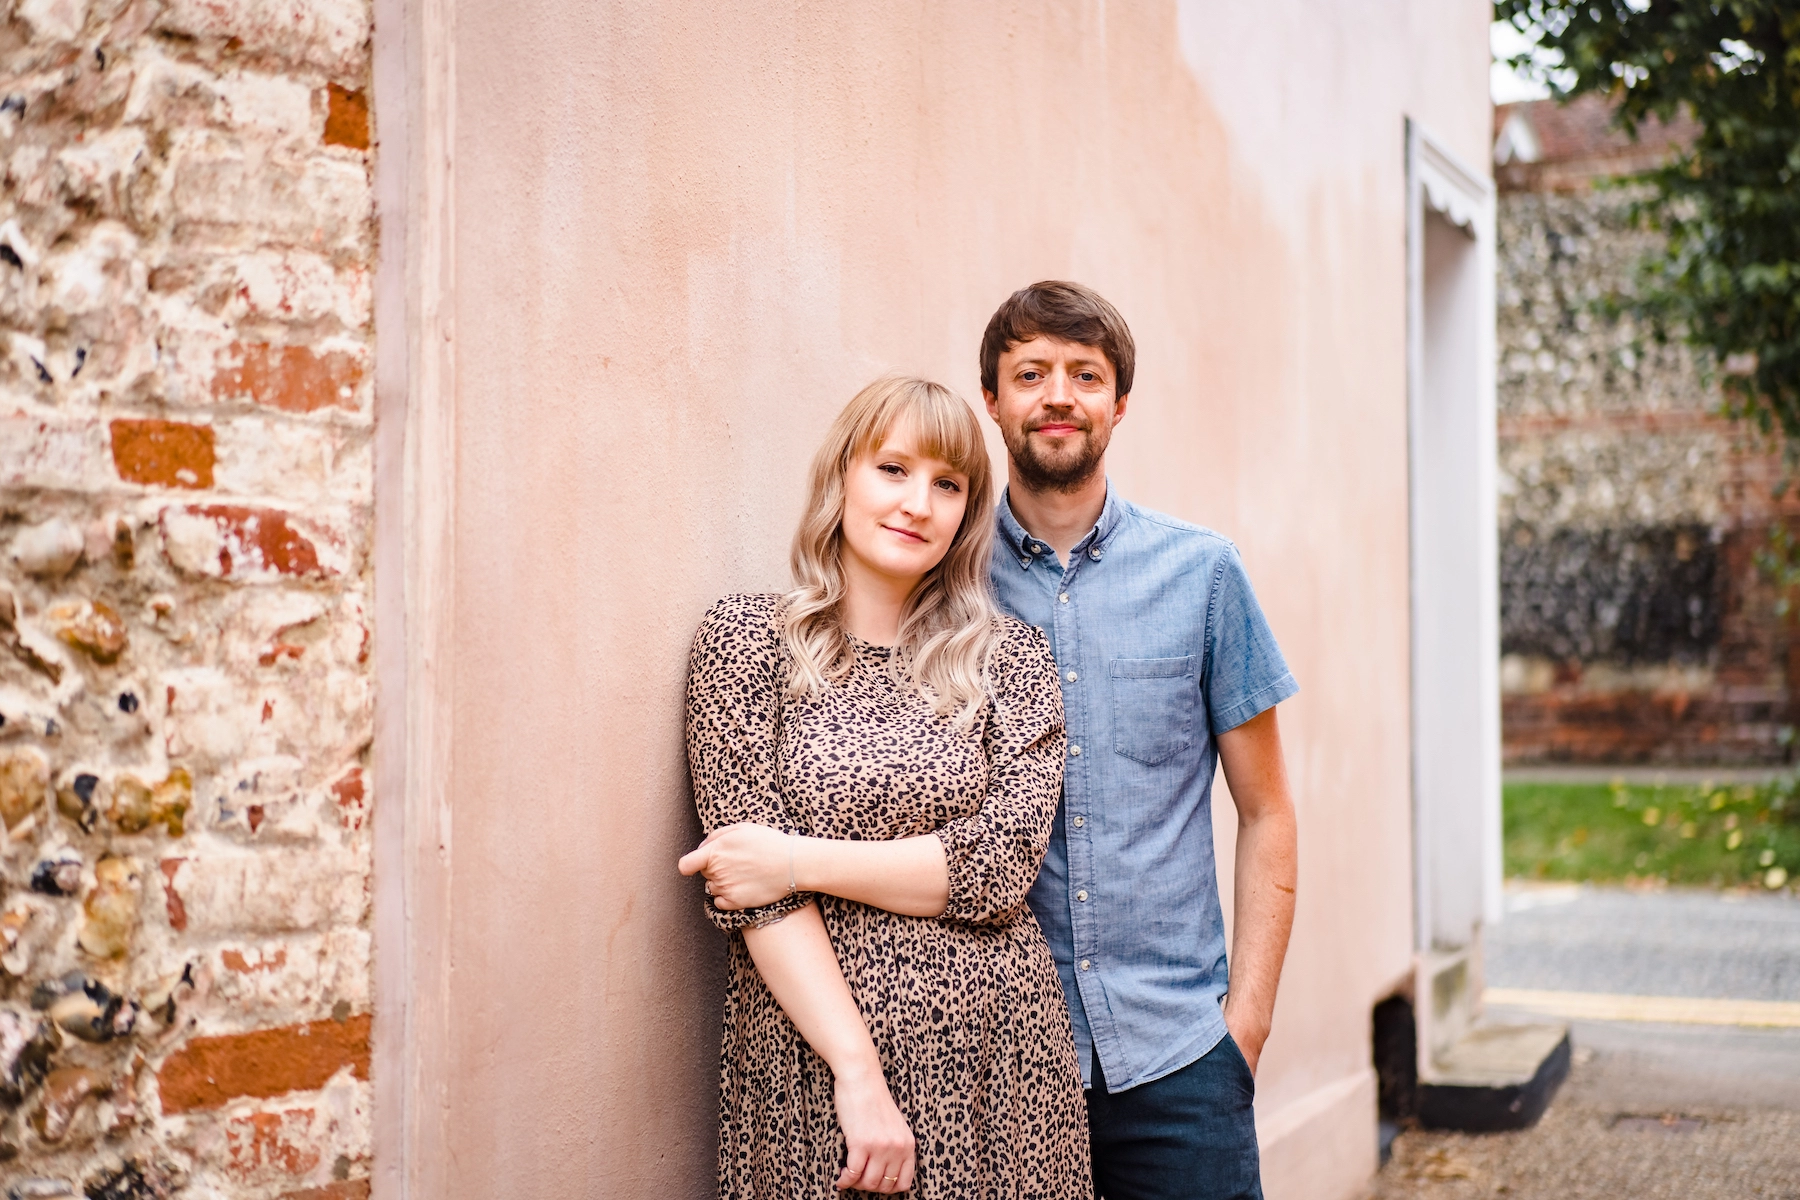 Hayley and Lucas, founders of Alphabet Bags, standing in front of a pink wall